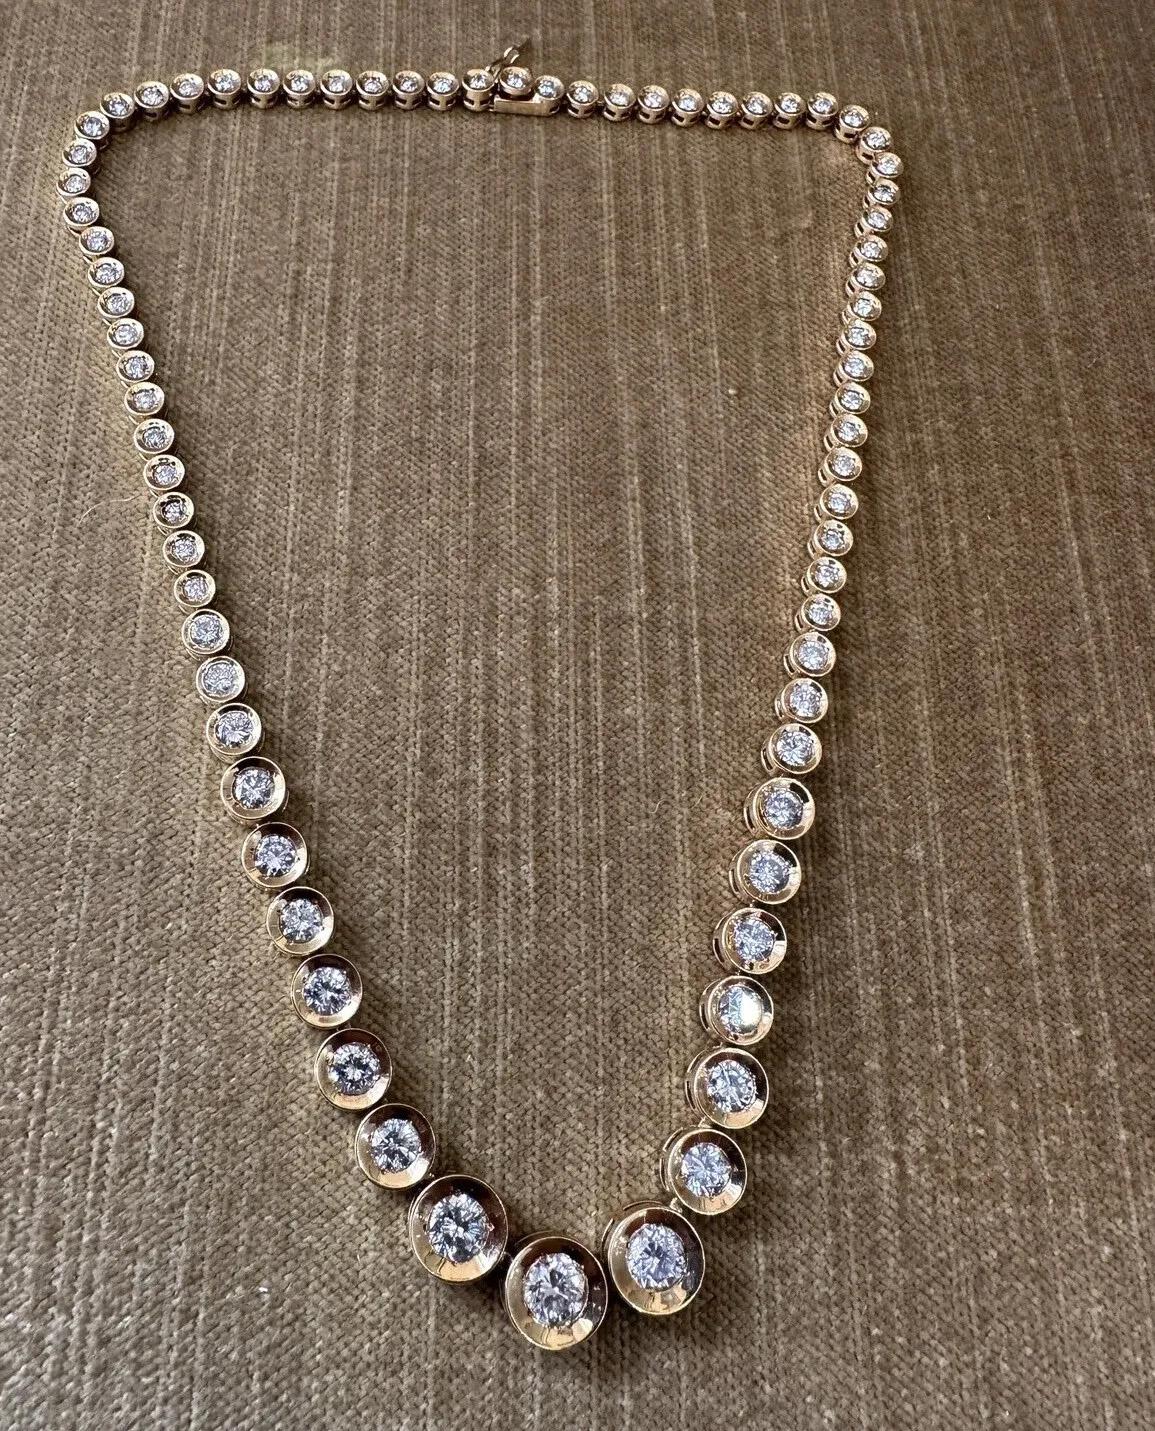 10.00 Carats Total Weight Diamond Tennis Necklace in 18k Yellow Gold  In Excellent Condition For Sale In La Jolla, CA